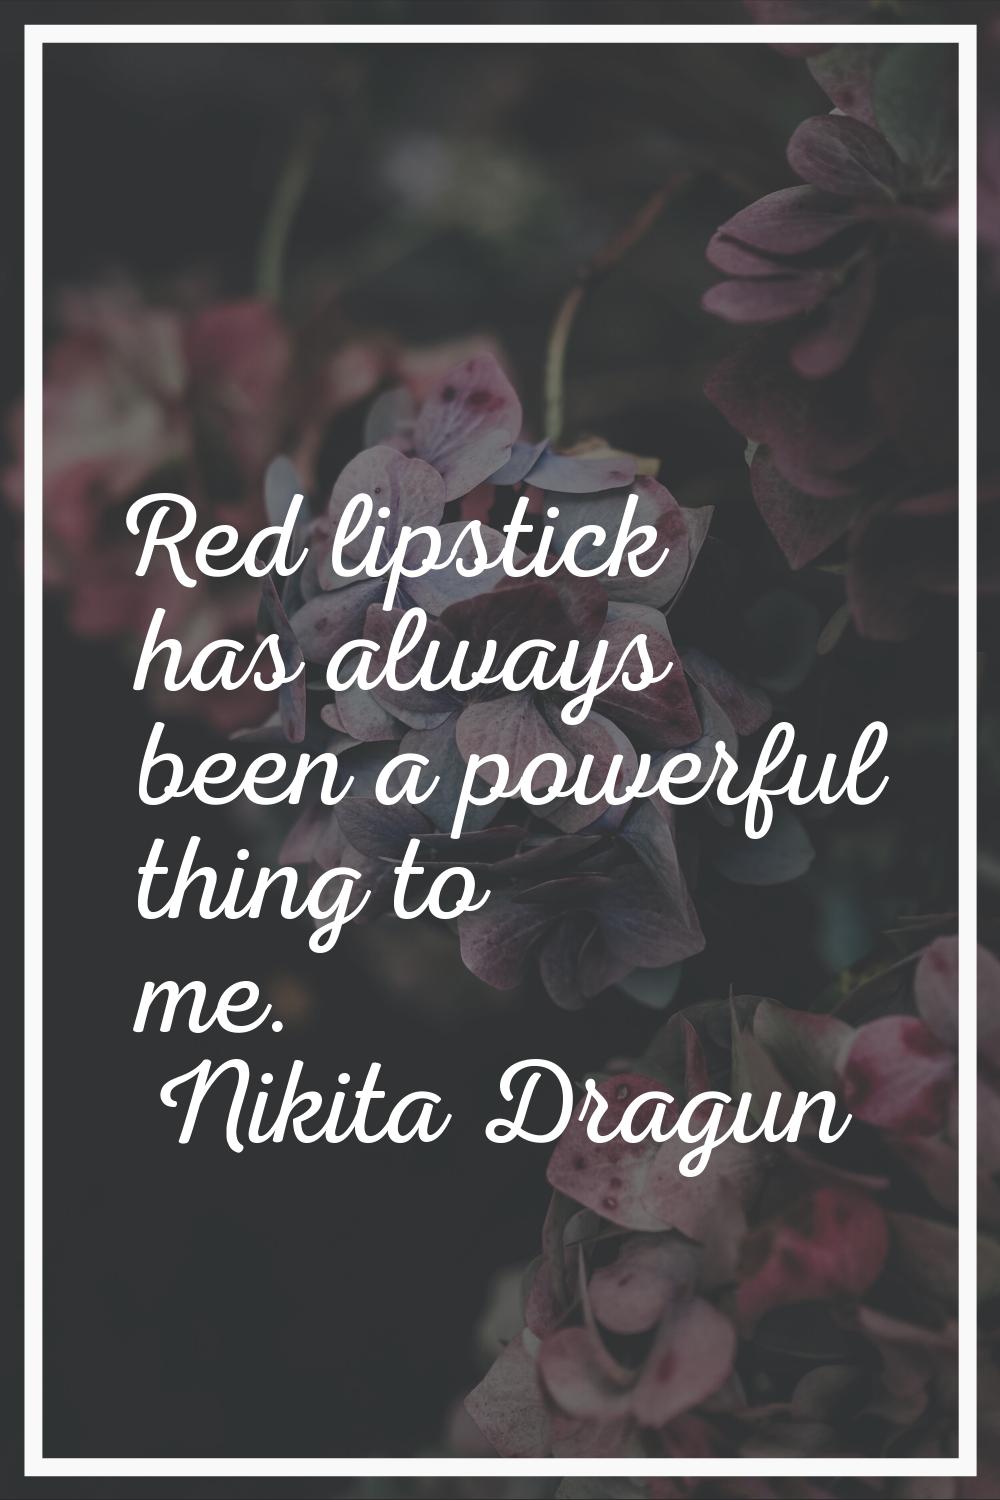 Red lipstick has always been a powerful thing to me.